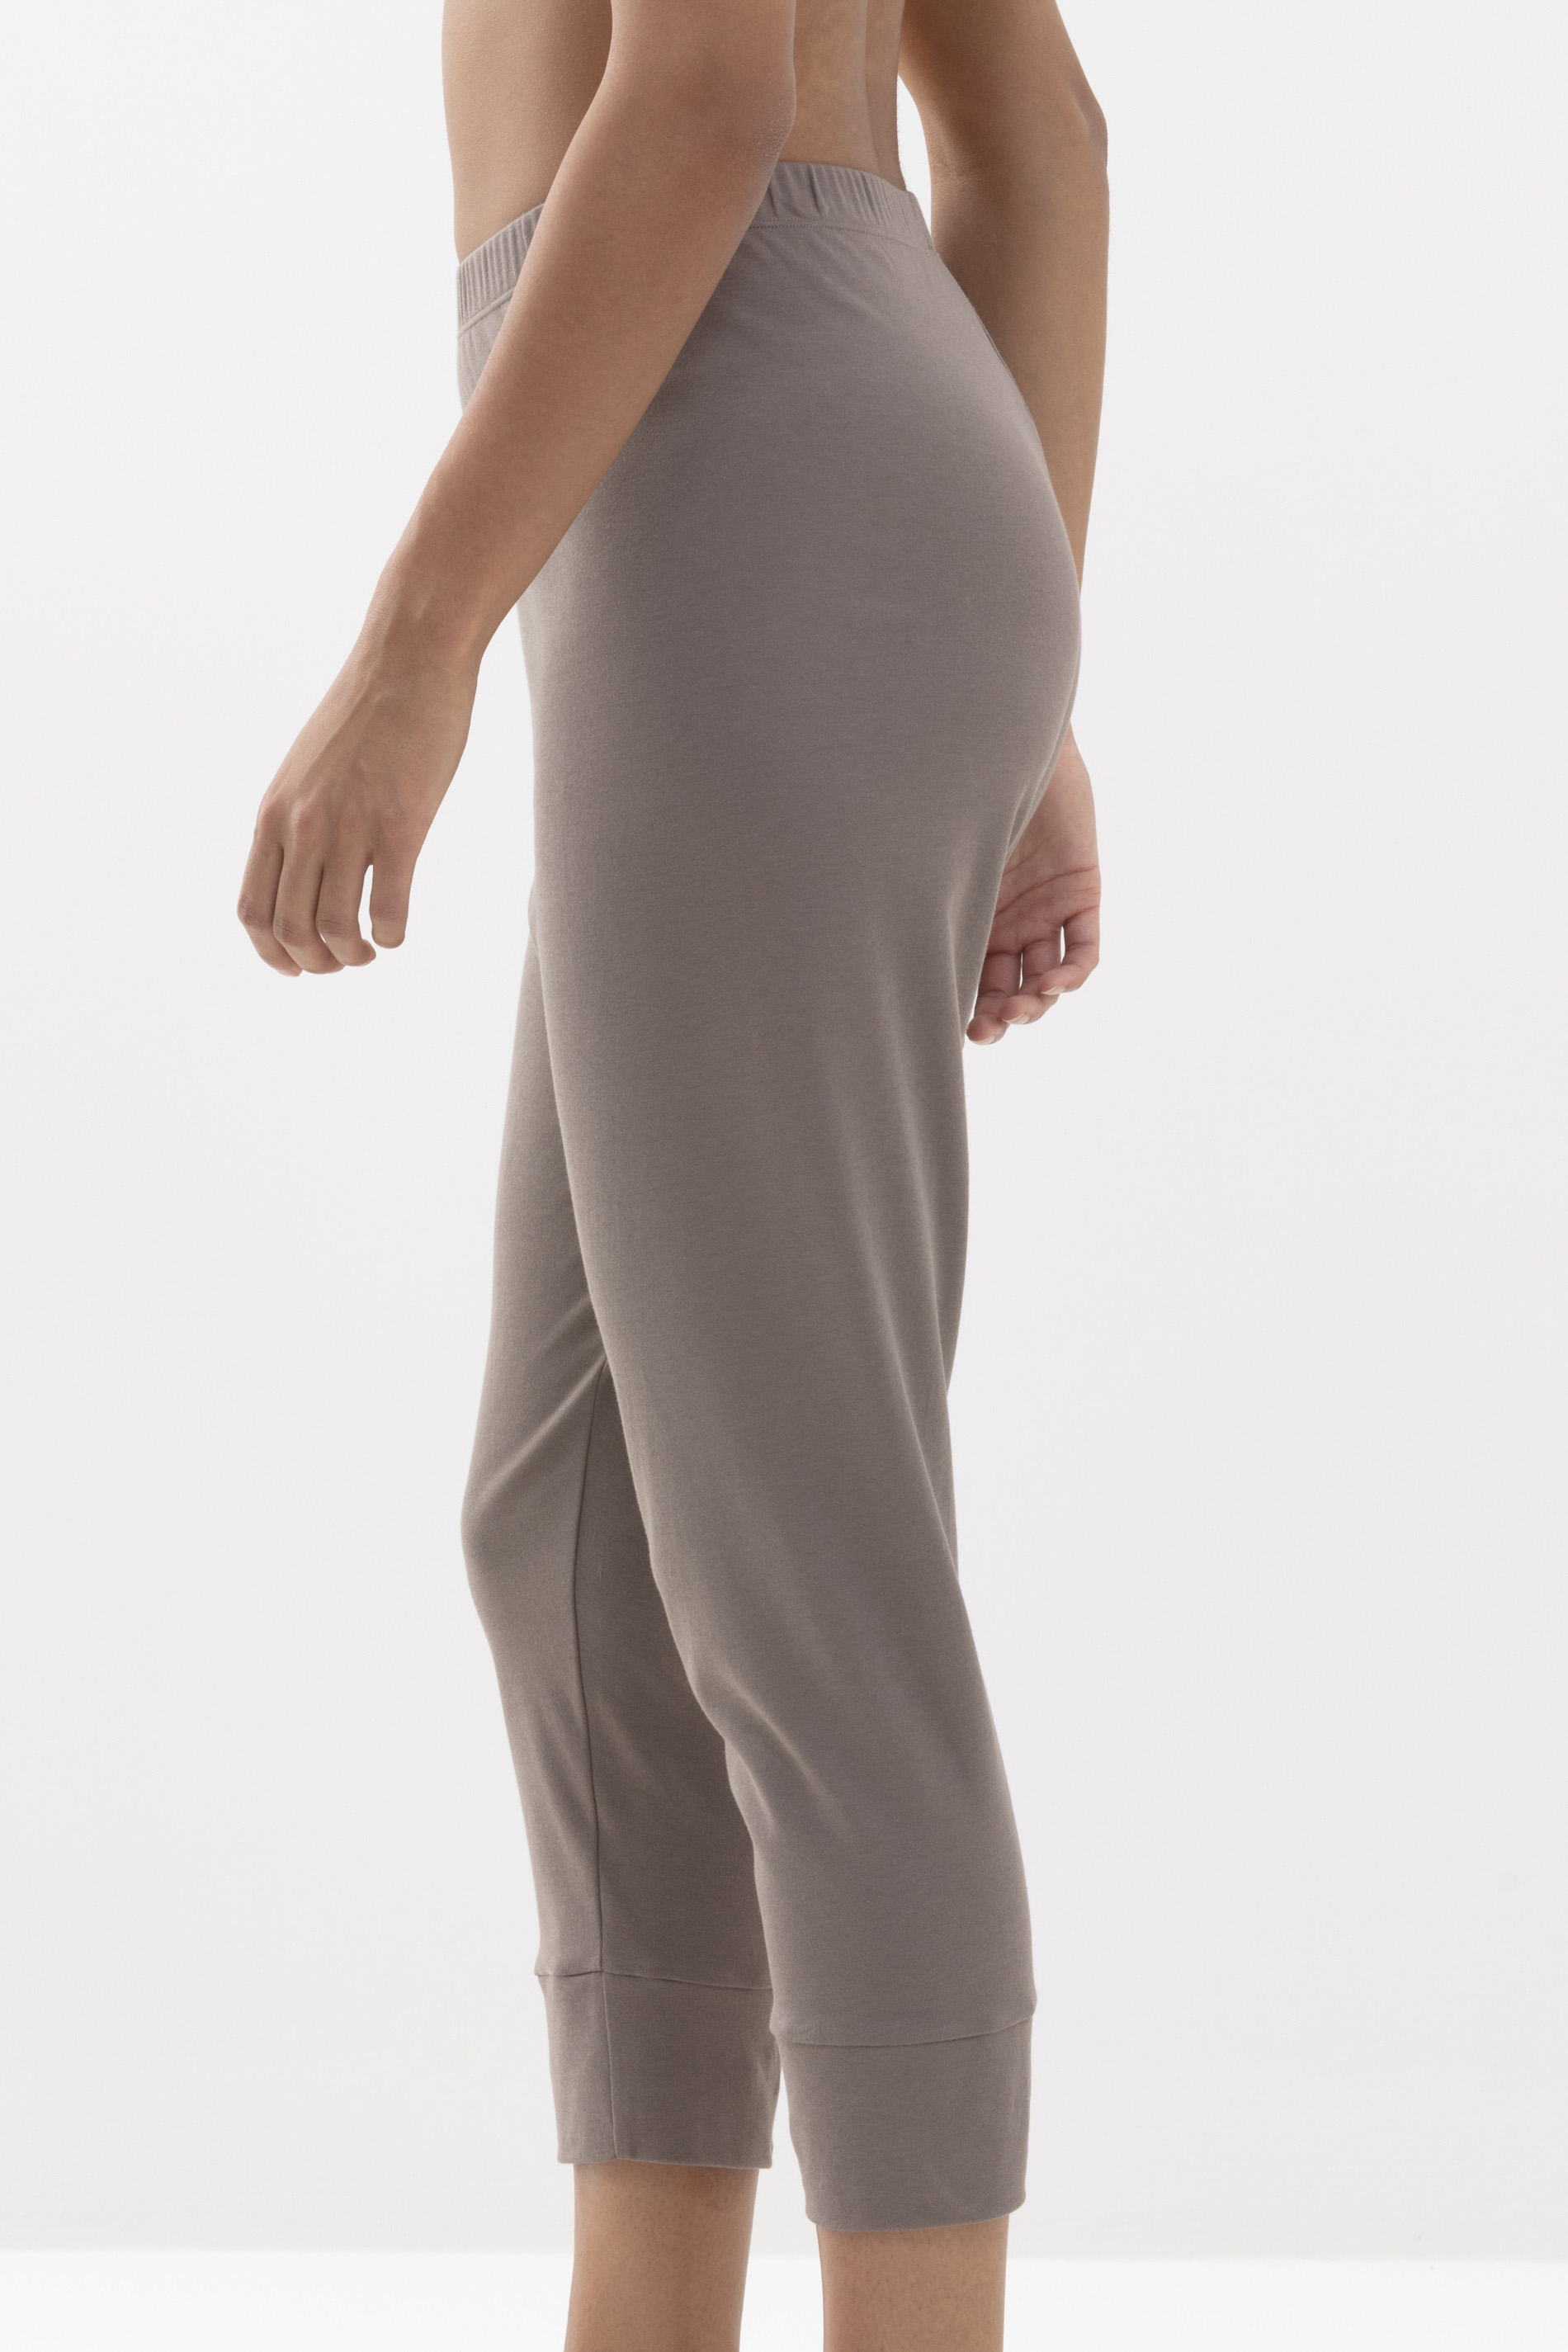 3/4-length bottoms Deep Taupe Serie N8TEX 2.0 Detail View 01 | mey®